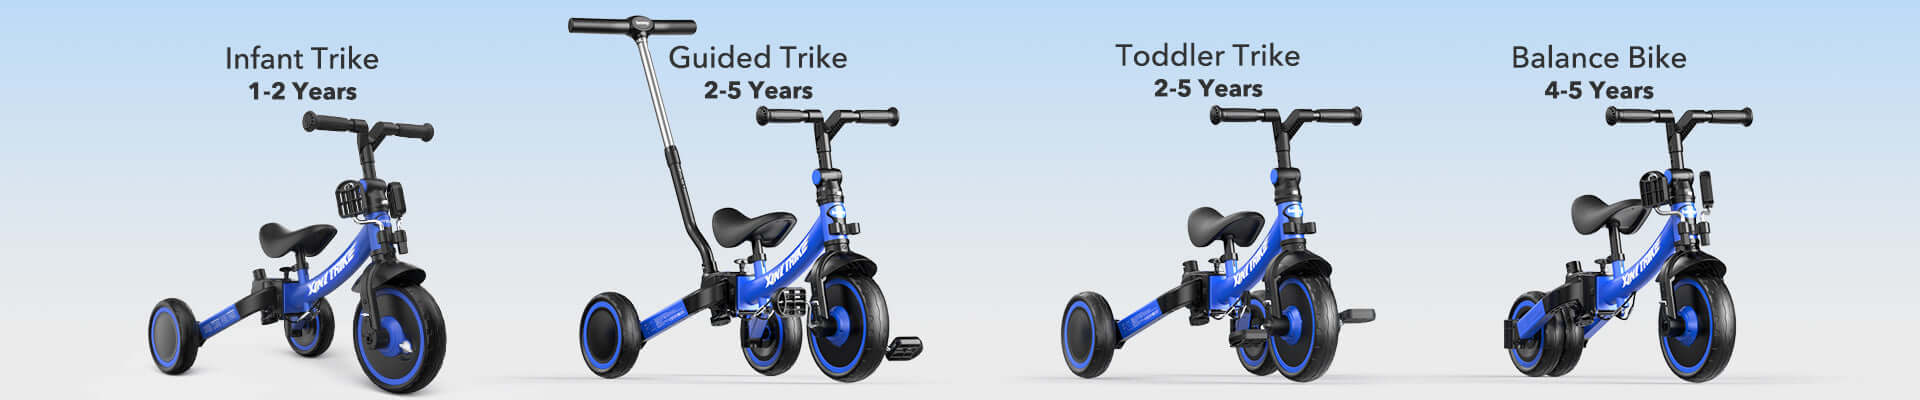 The children's tricycle offers 4 riding modes